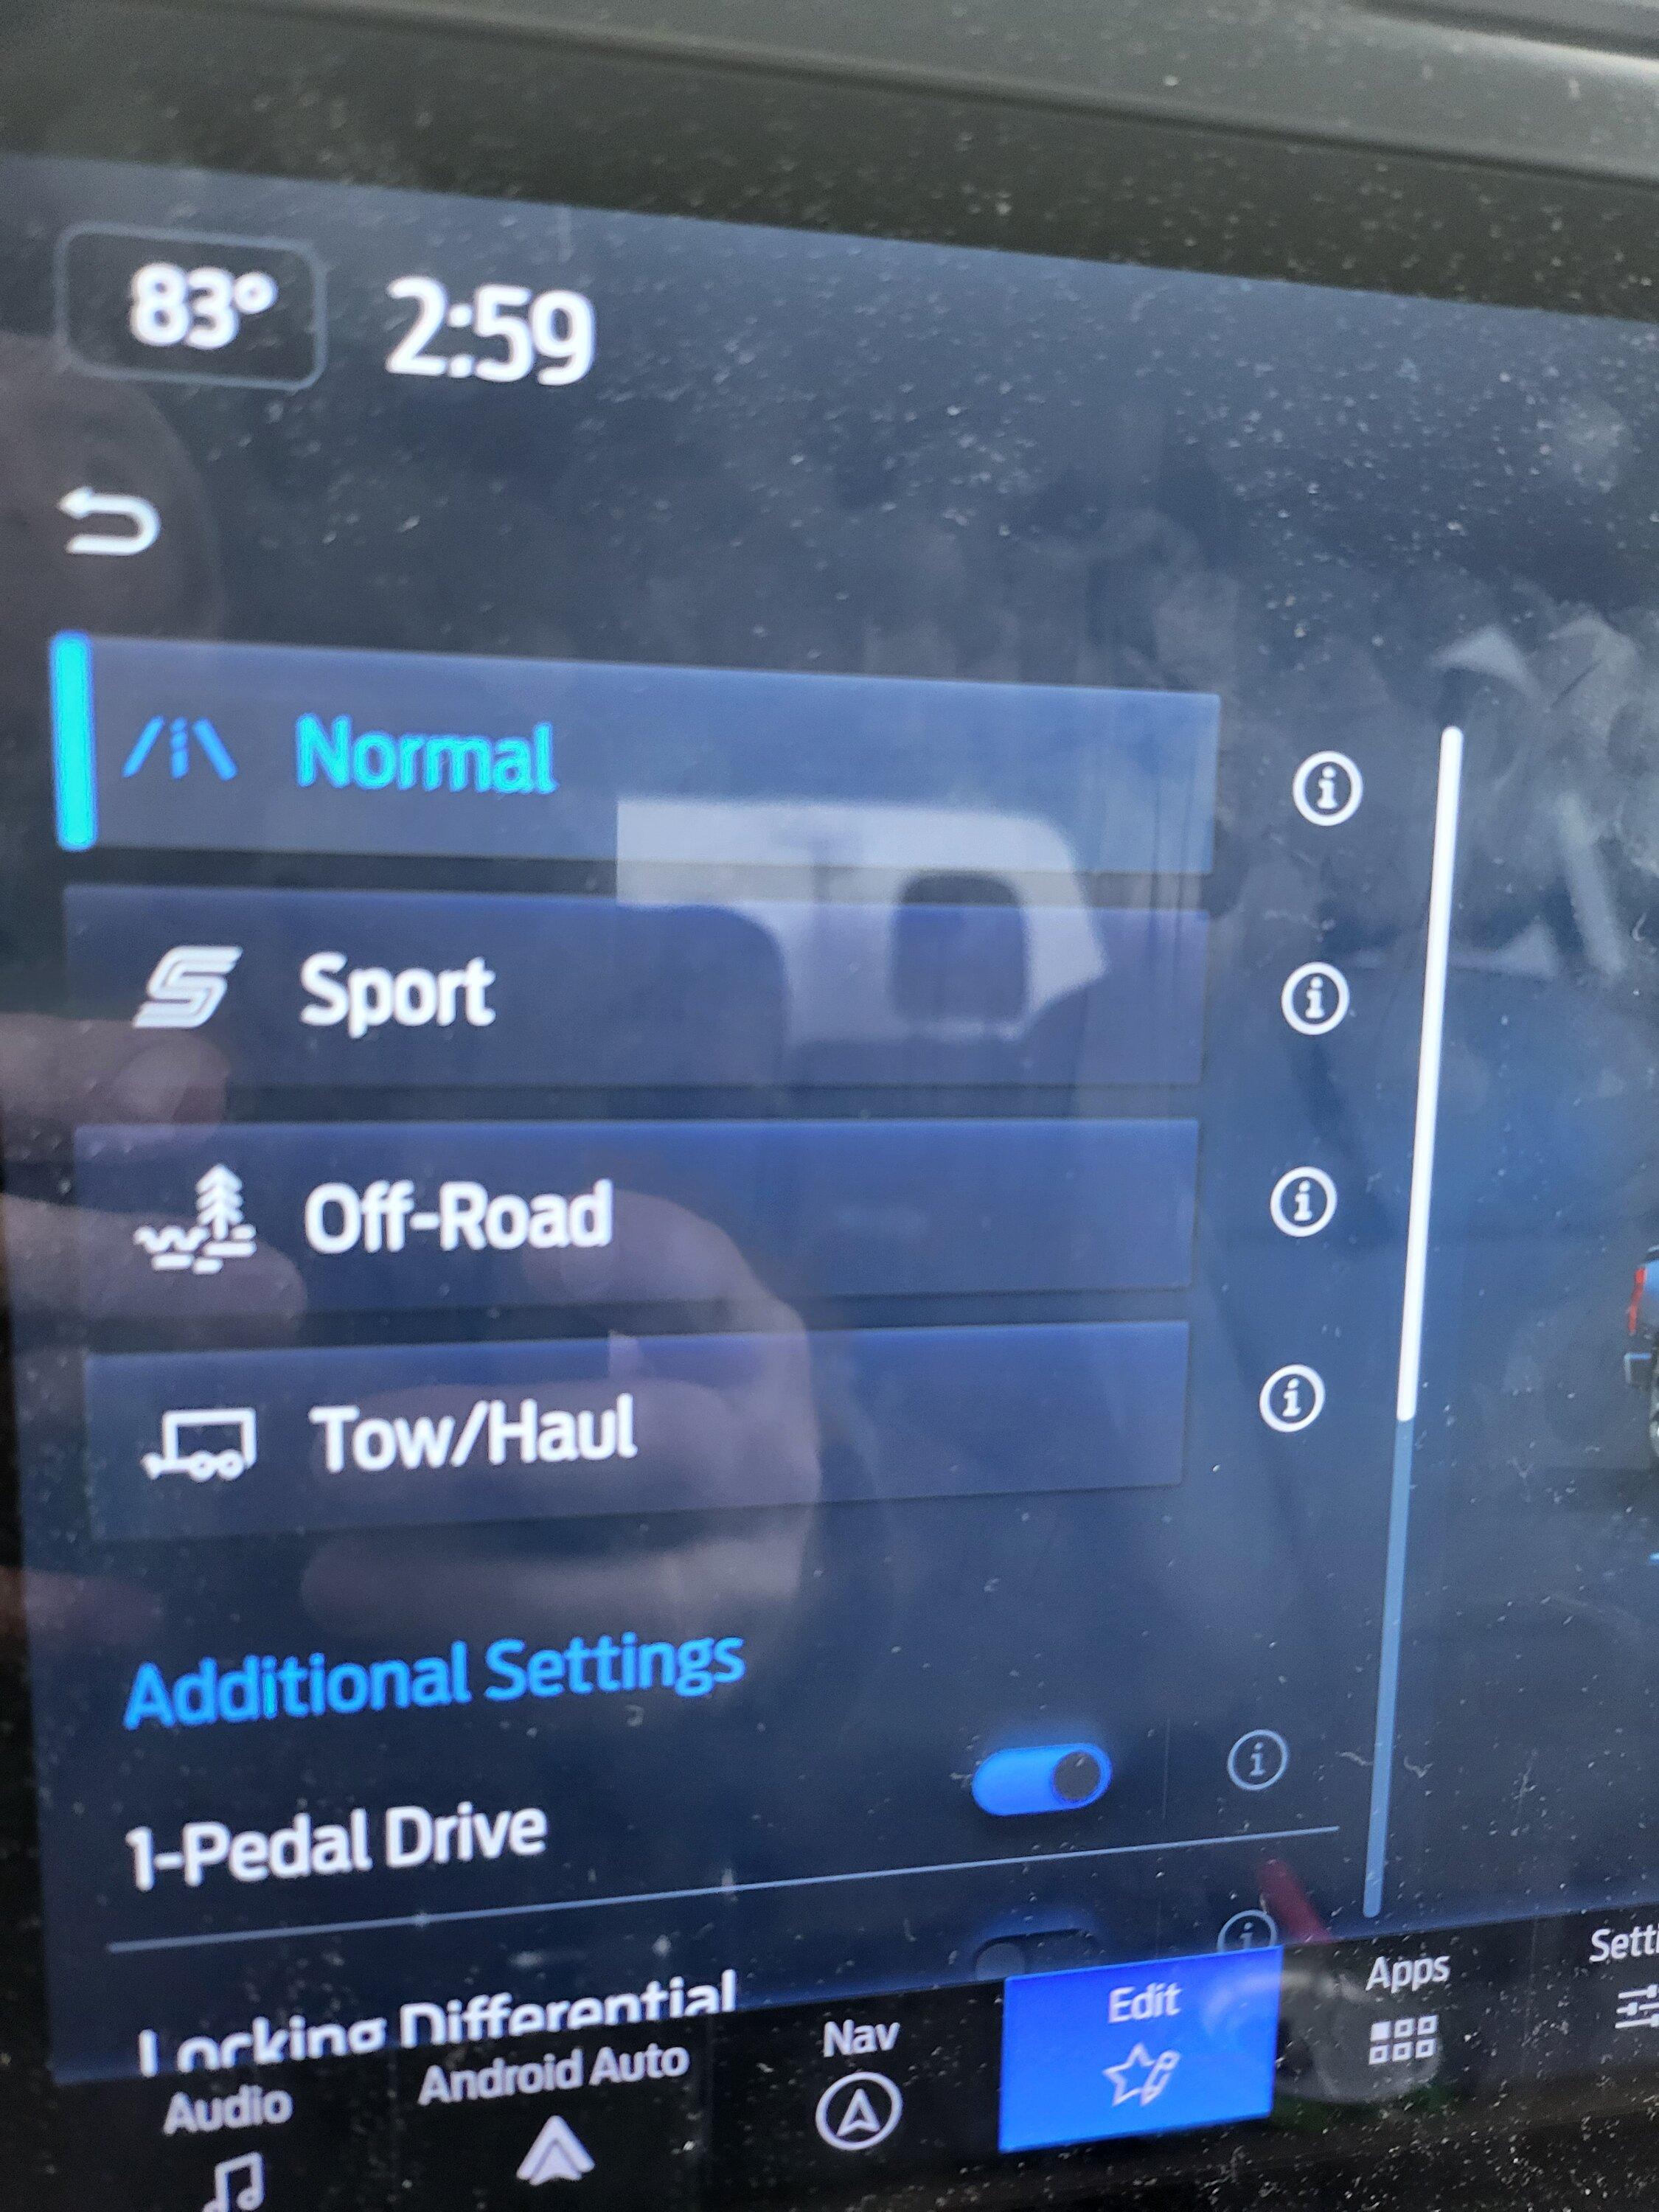 Ford F-150 Lightning Drive mode: snowflake on the icon, but where is snow mode? 20221222_145917